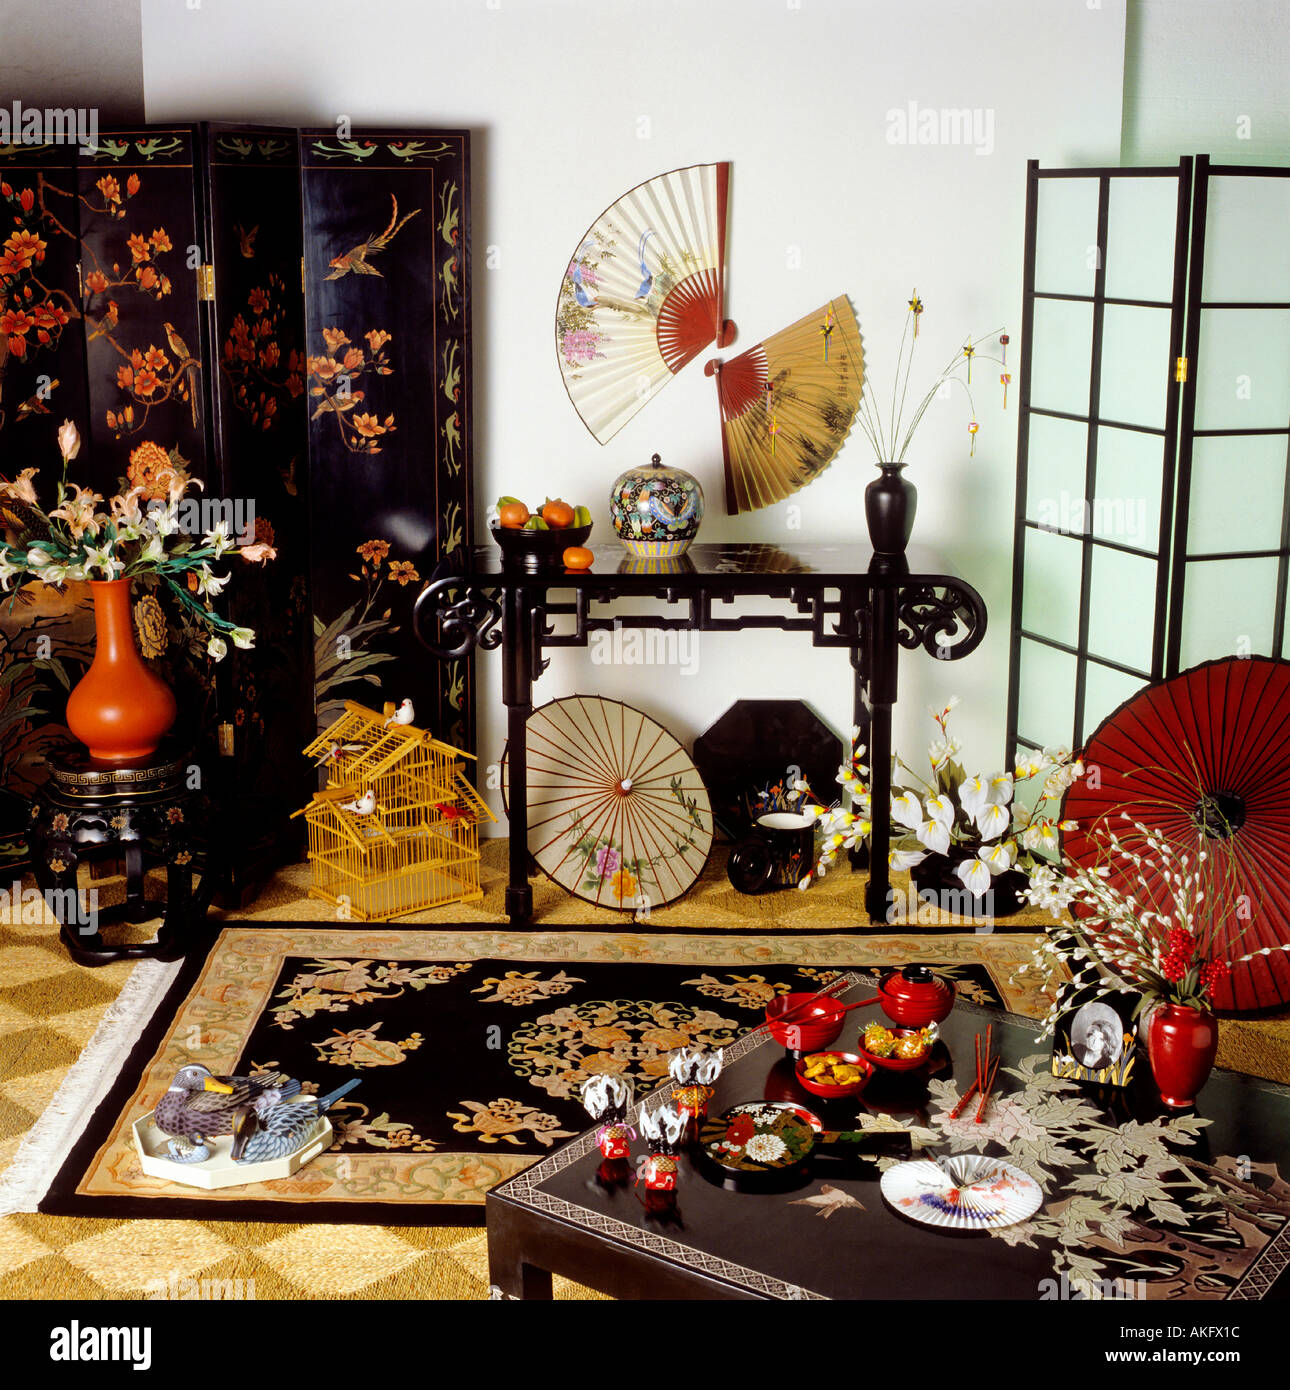 japanese furniture and bric a brac editorial use only Stock Photo